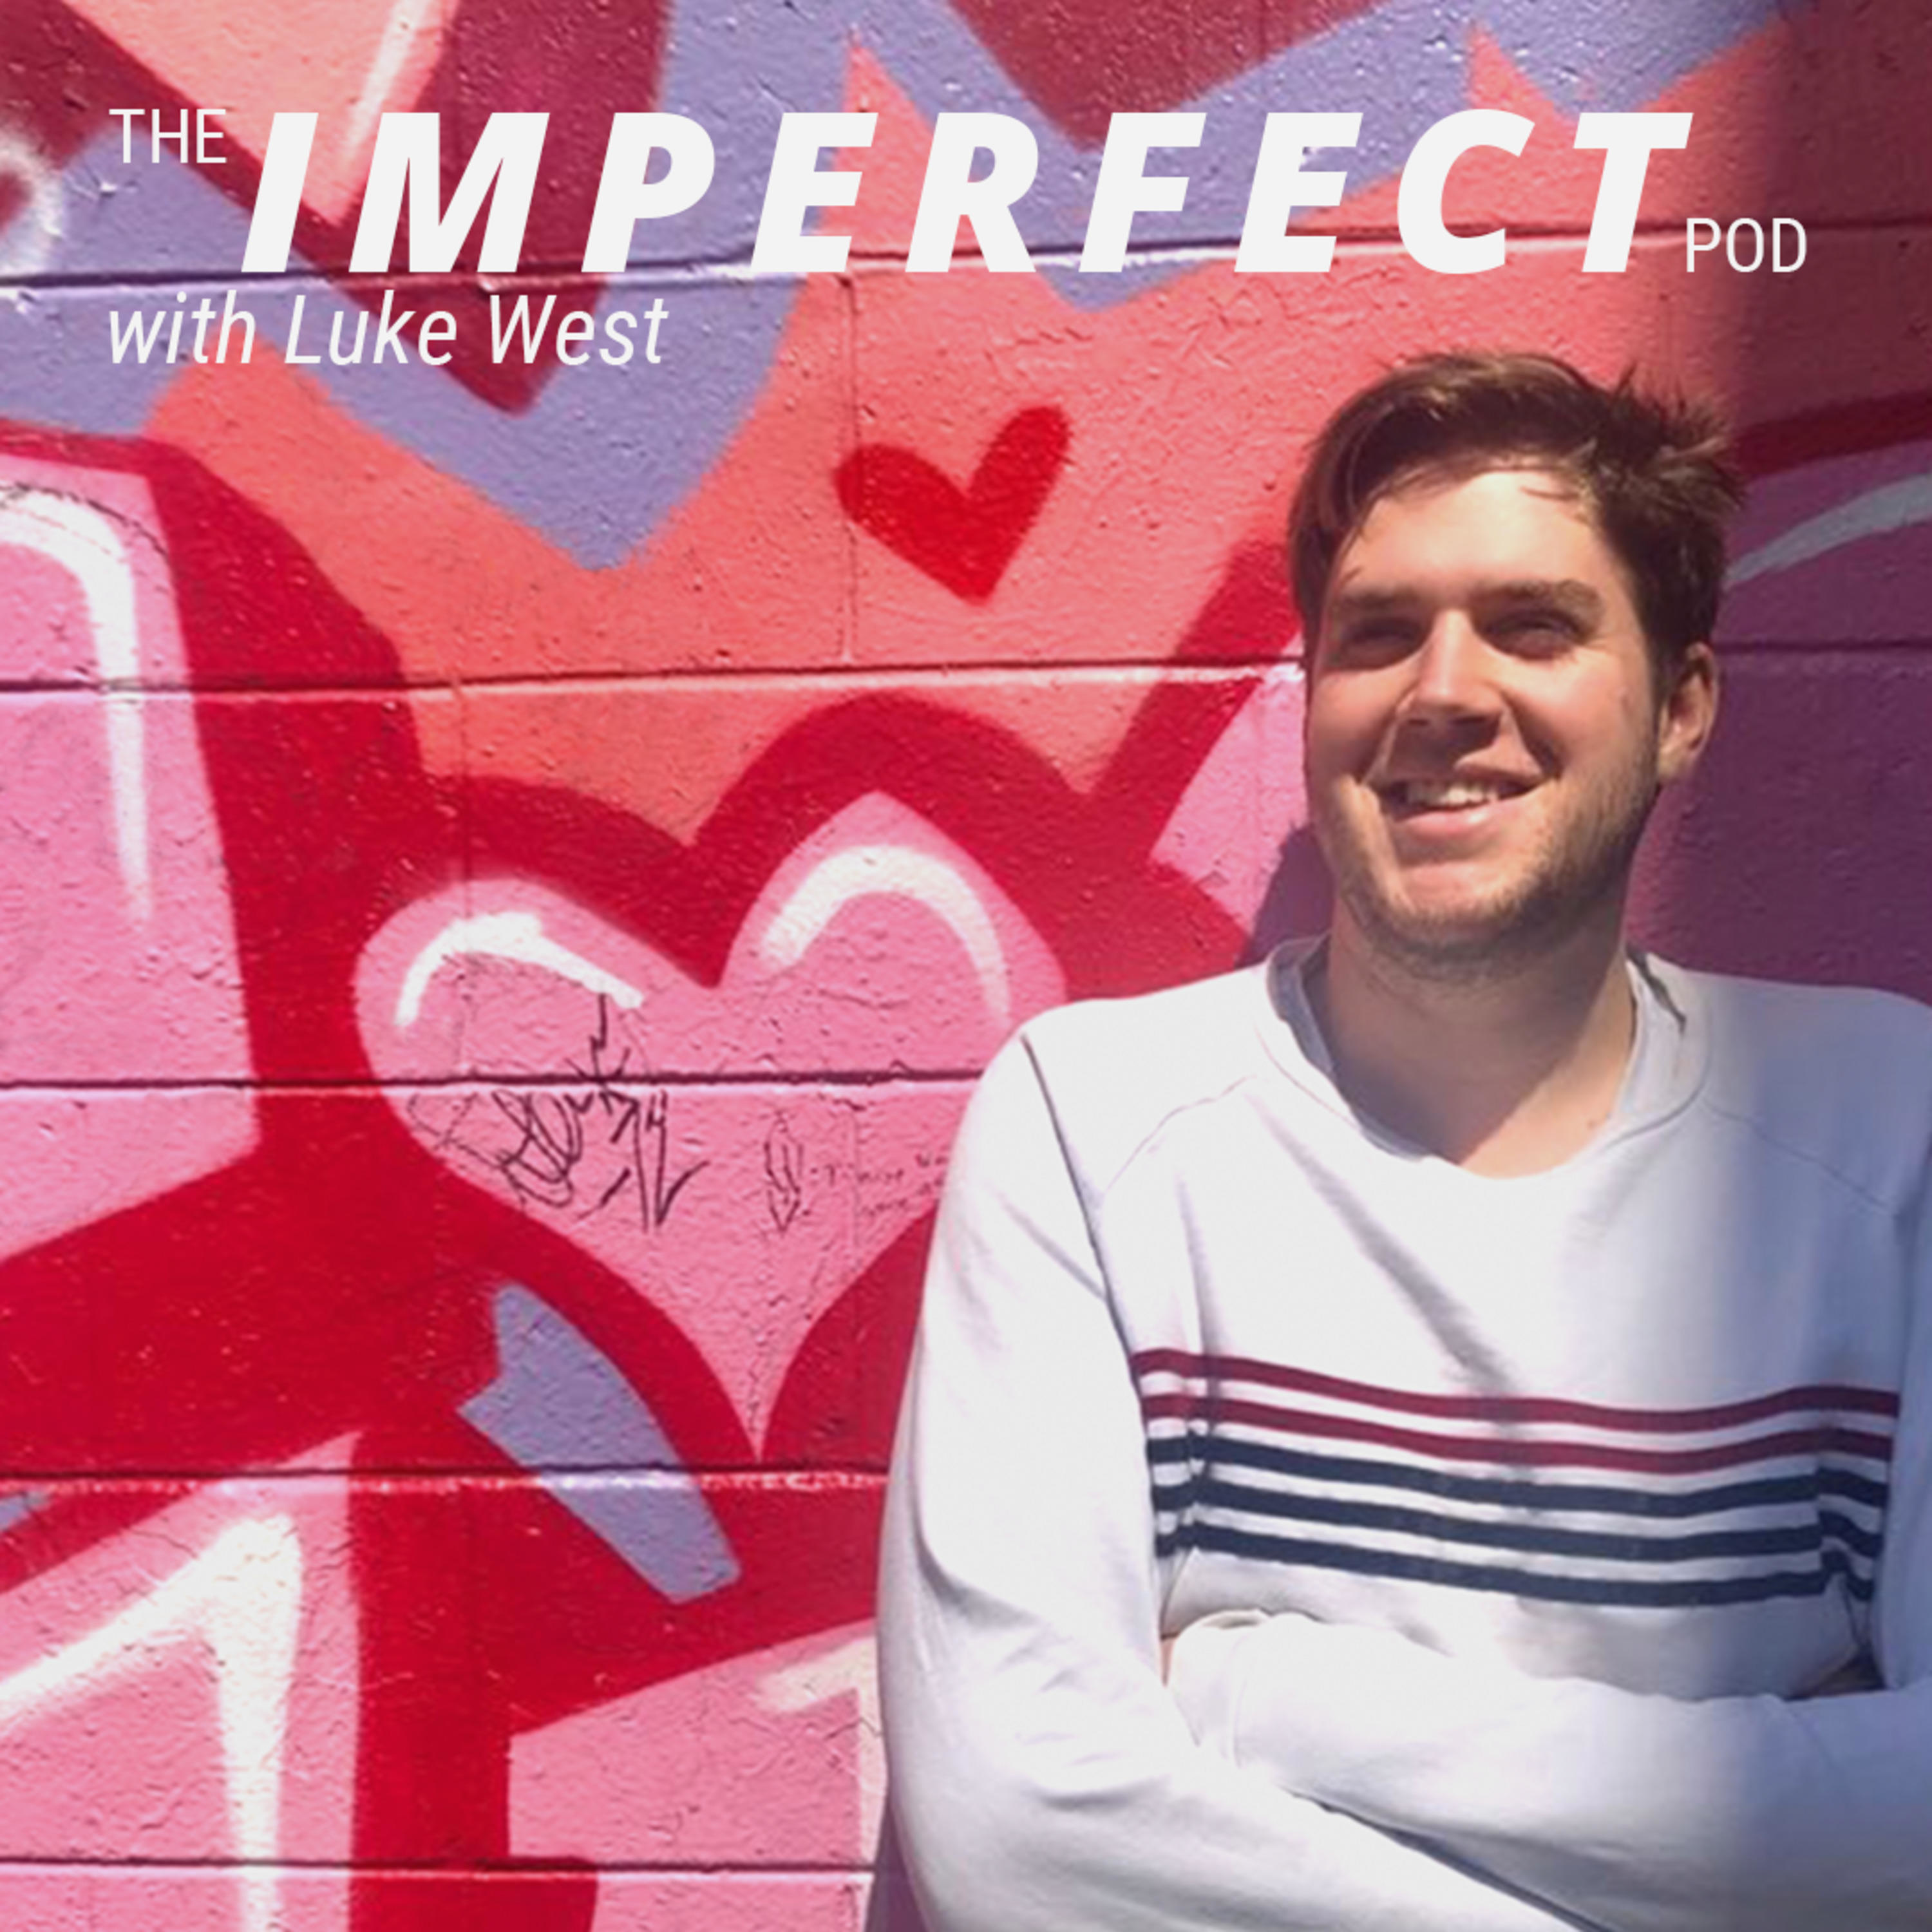 Artwork for podcast The Imperfect Pod